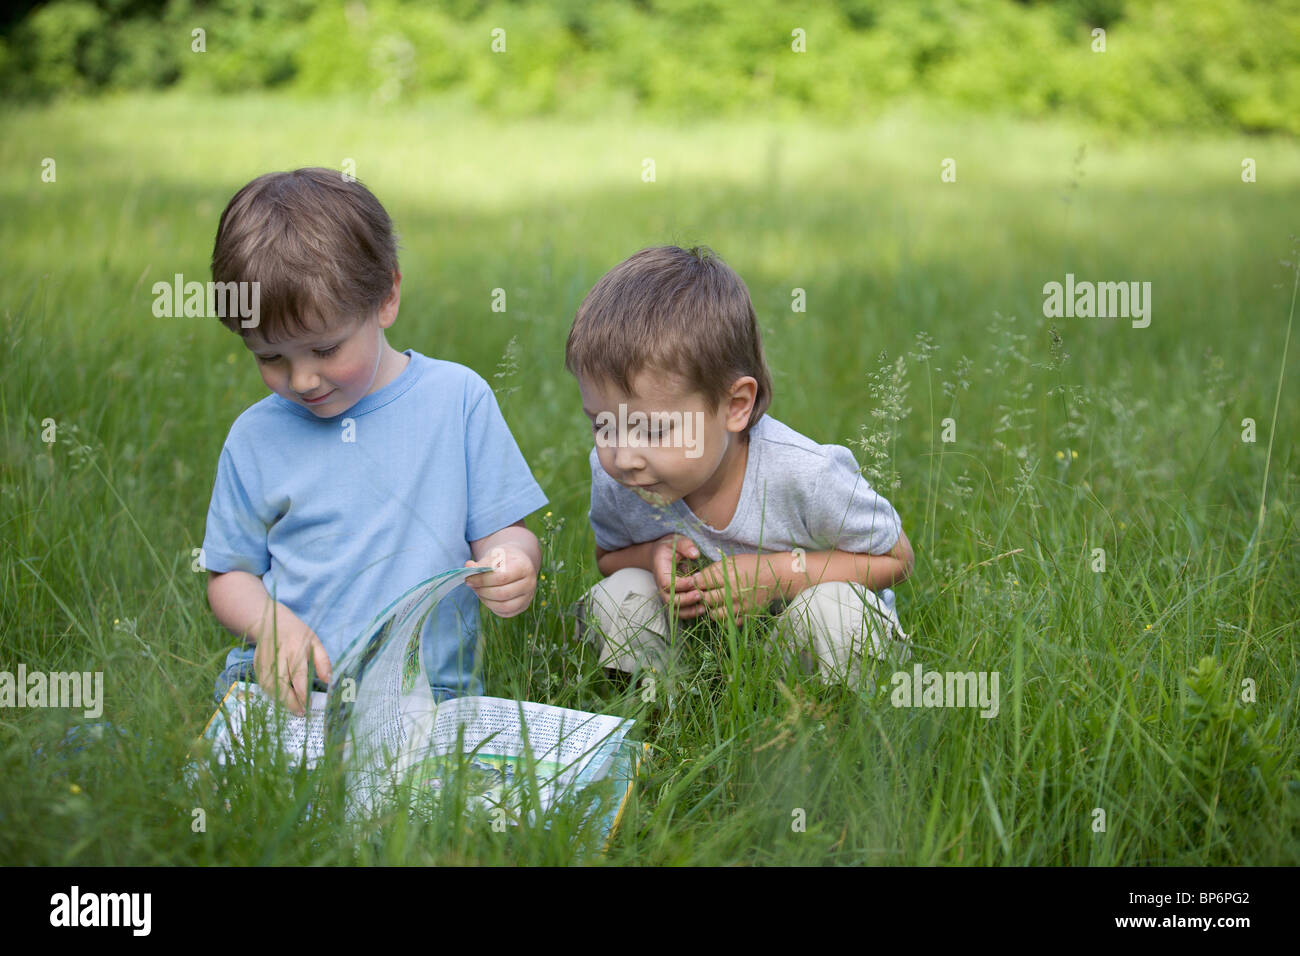 Two boys looking at a book in a field Stock Photo